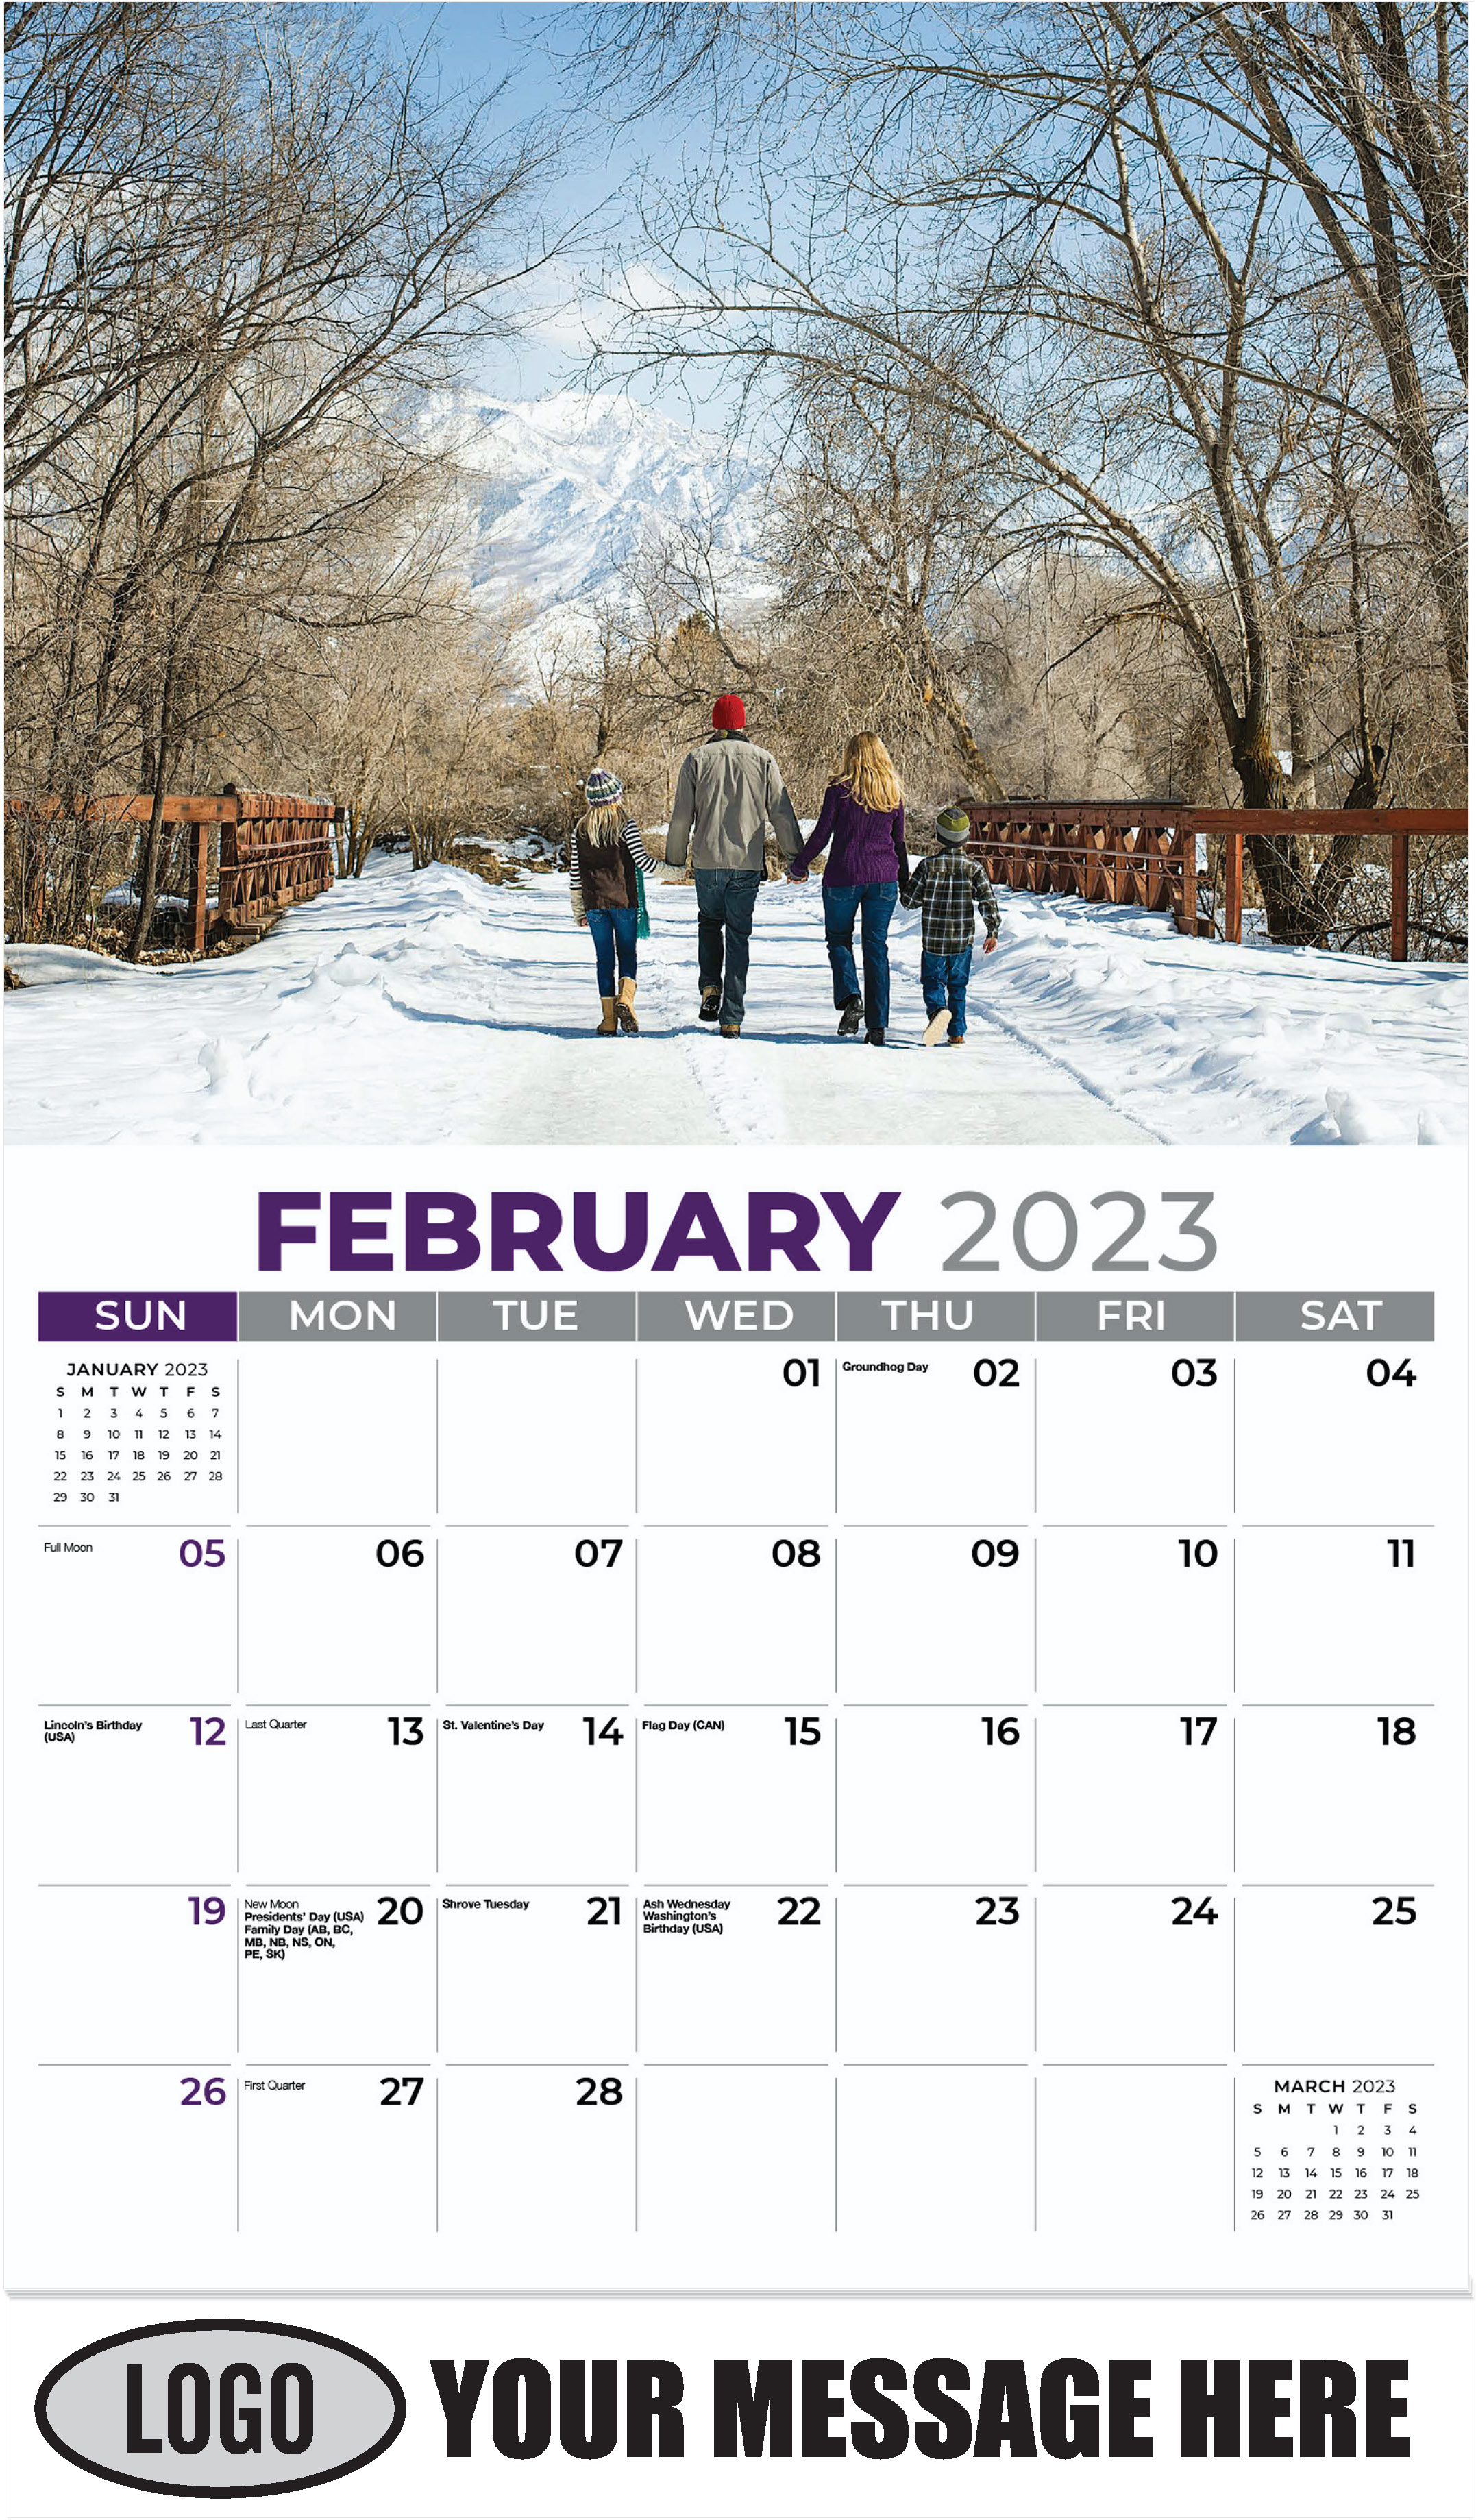 Family Walking in the Snow - February - Country Spirit 2023 Promotional Calendar